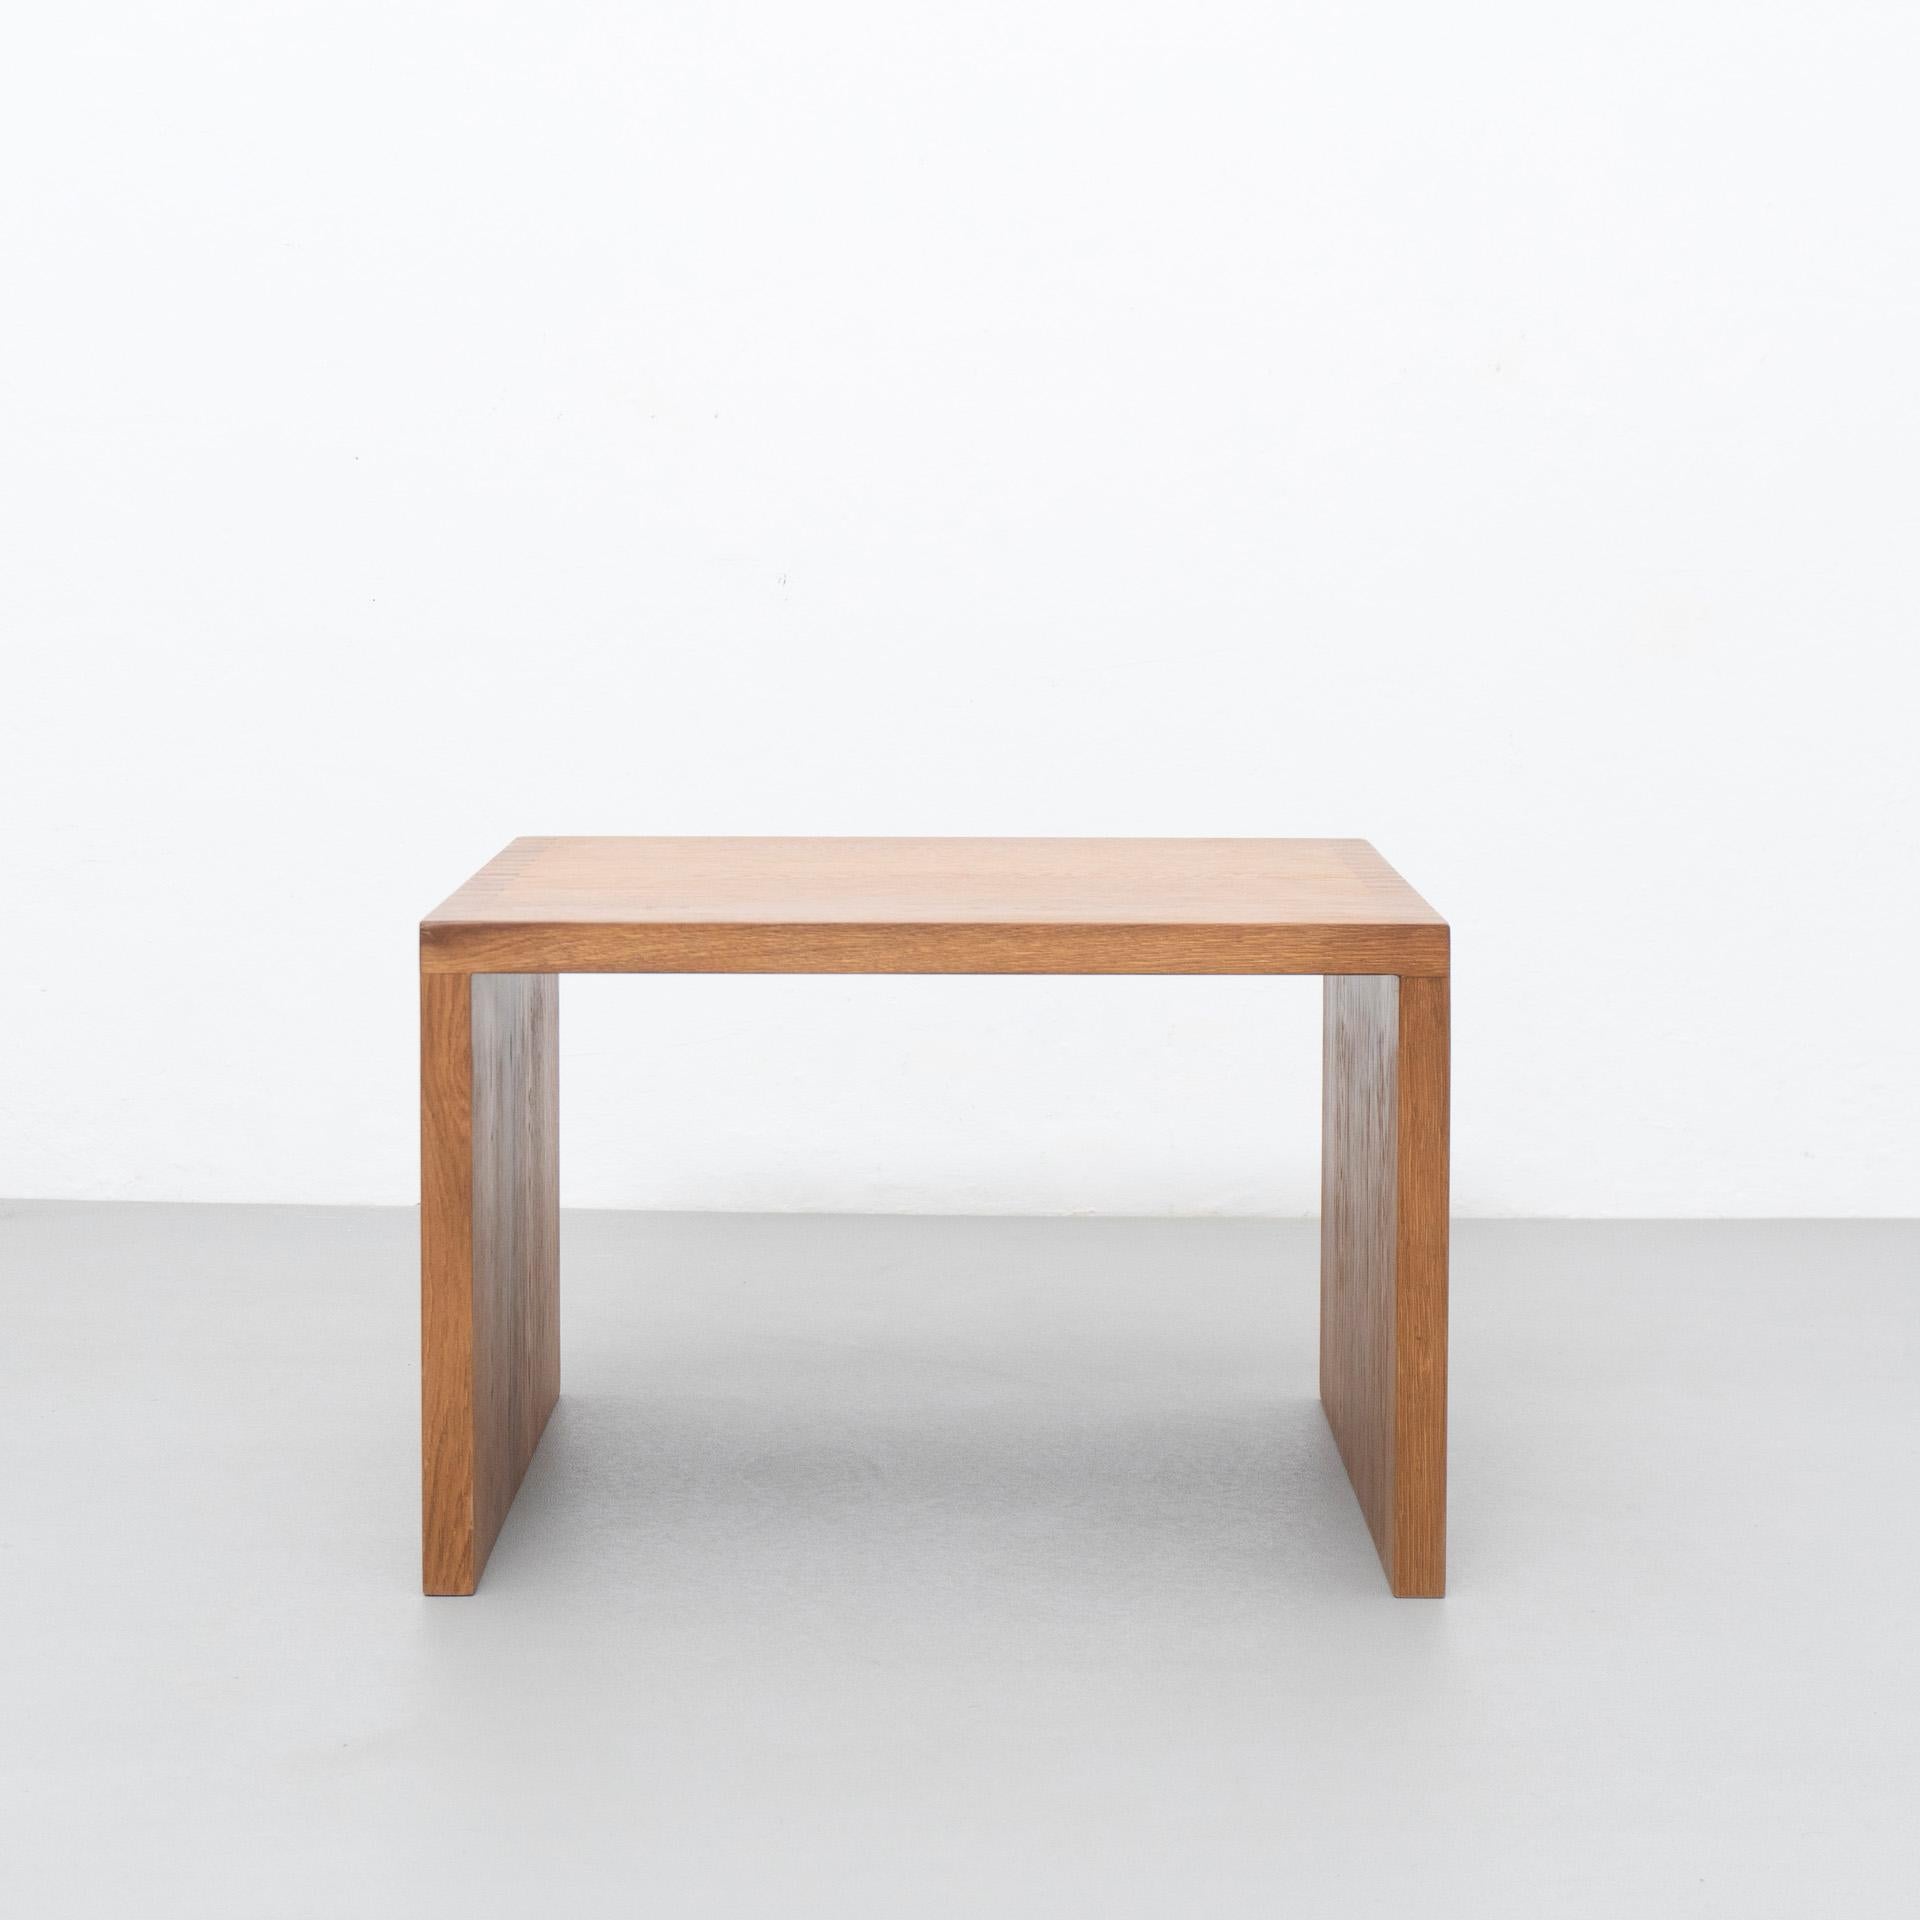 Dada Est. Contemporary Solid Oak Low Table For Sale 4